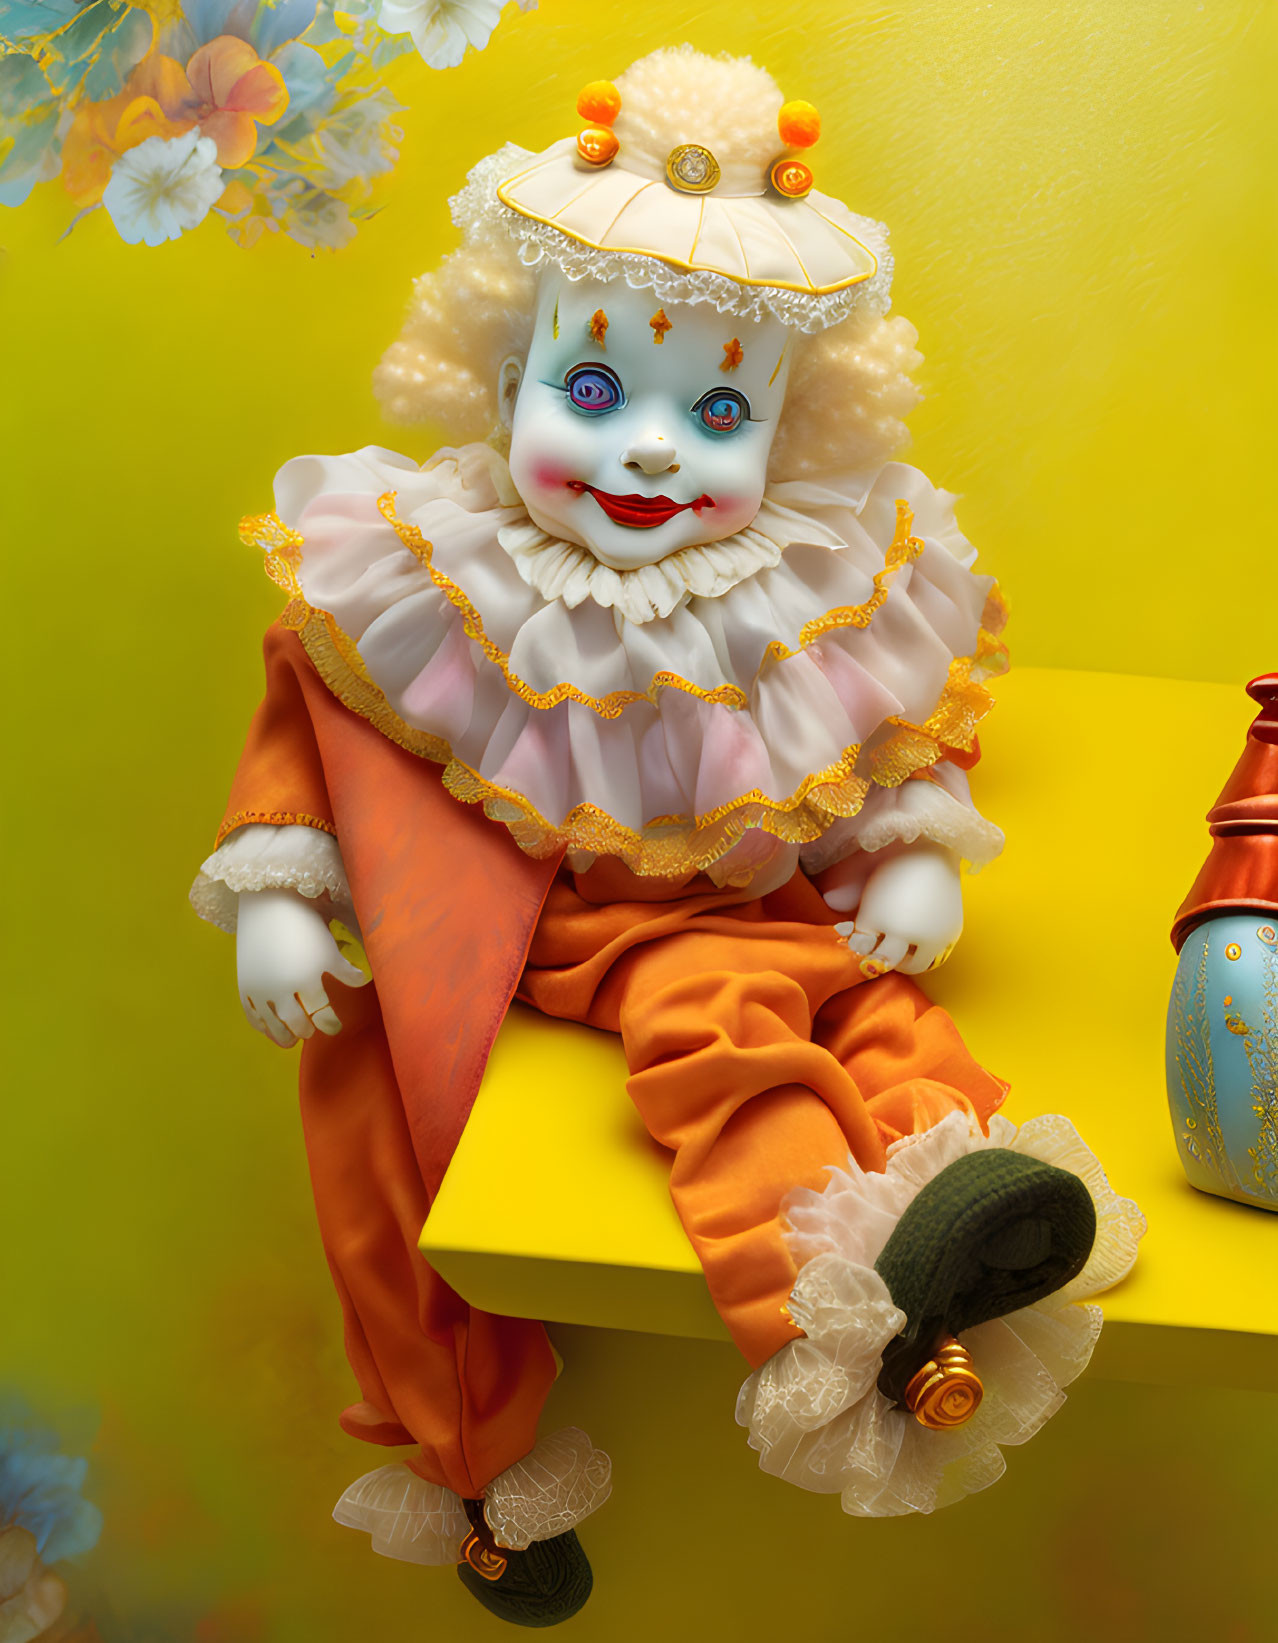 Vintage Clown Doll in White and Orange Costume on Yellow Floral Background